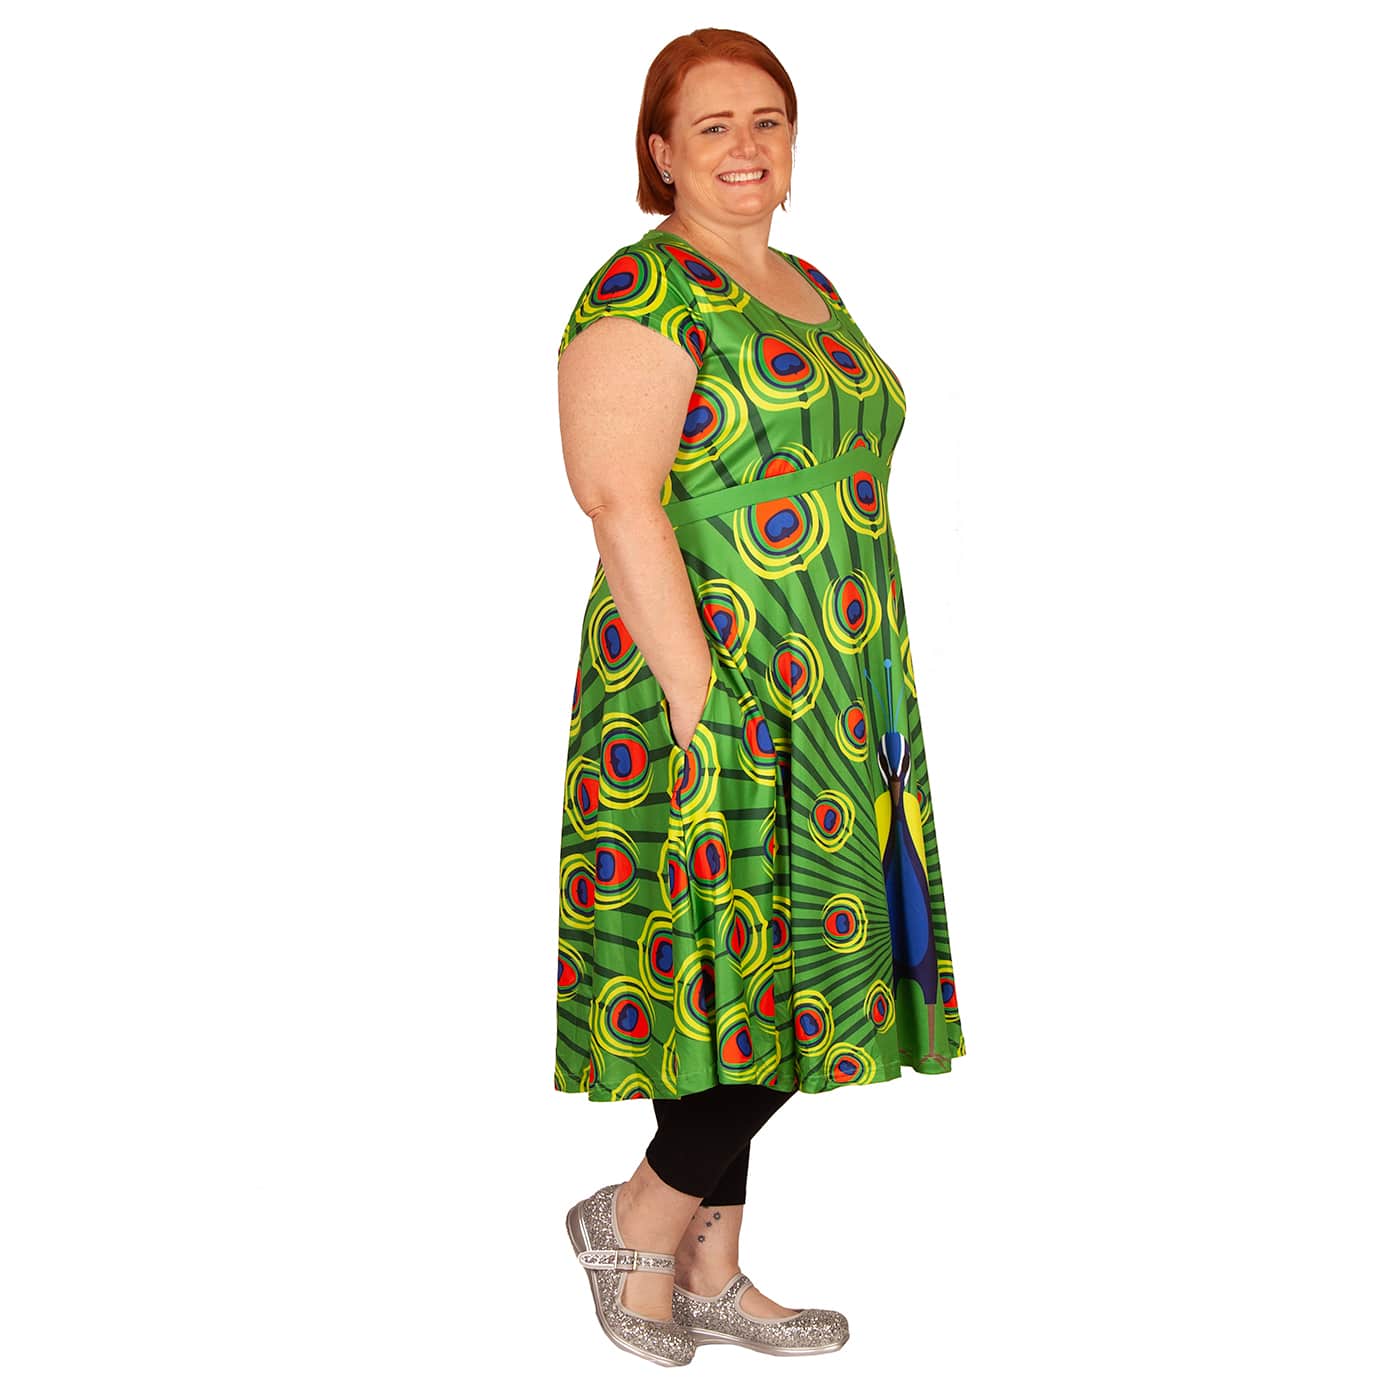 Olive Tea Dress by RainbowsAndFairies.com (Peacock - Peahen - Feathers - Bird - Rock & Roll - Dress With Pockets - Rockabilly - Vintage Inspired) - SKU: CL_TEADR_OLIVE_ORG - Pic 08